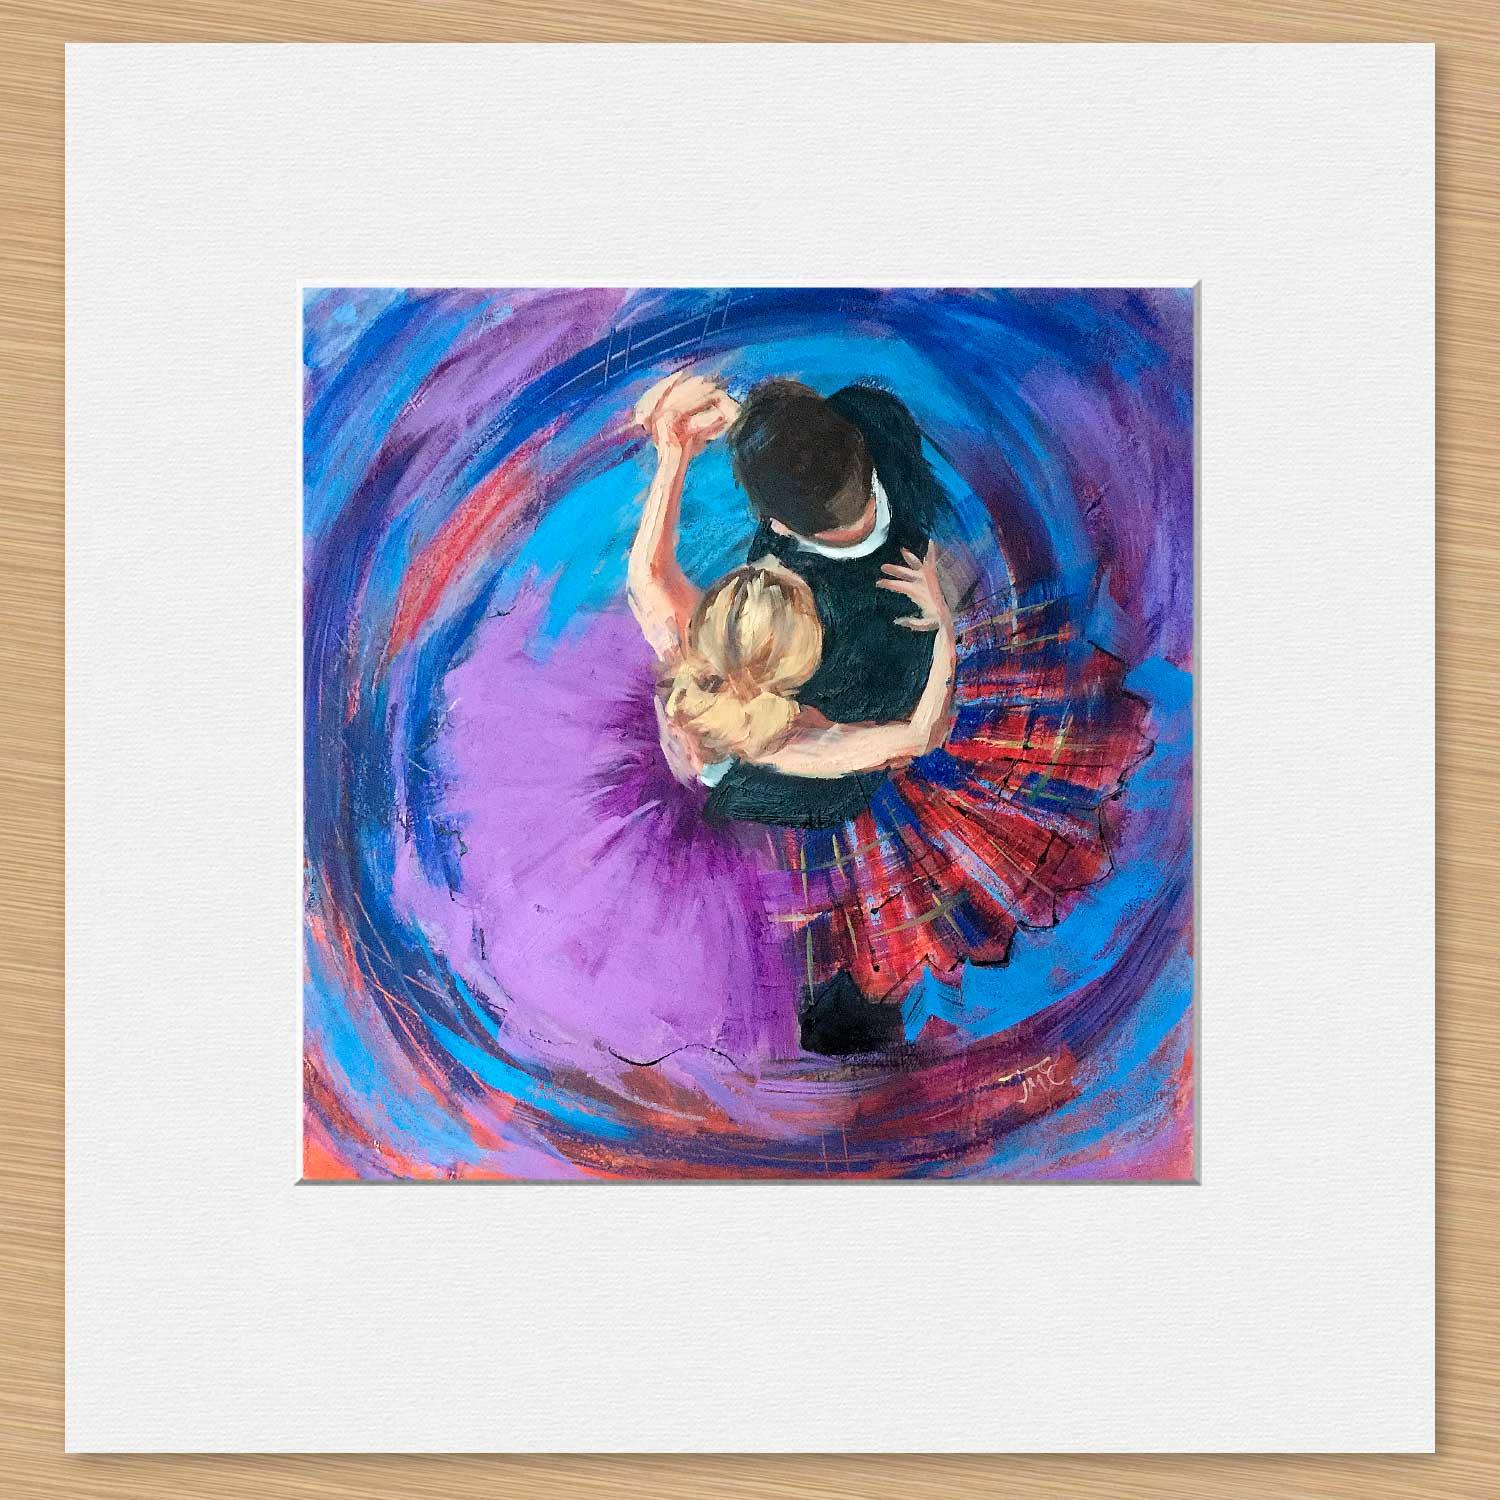 Above the Dance Mounted Card from an original painting by artist Janet McCrorie